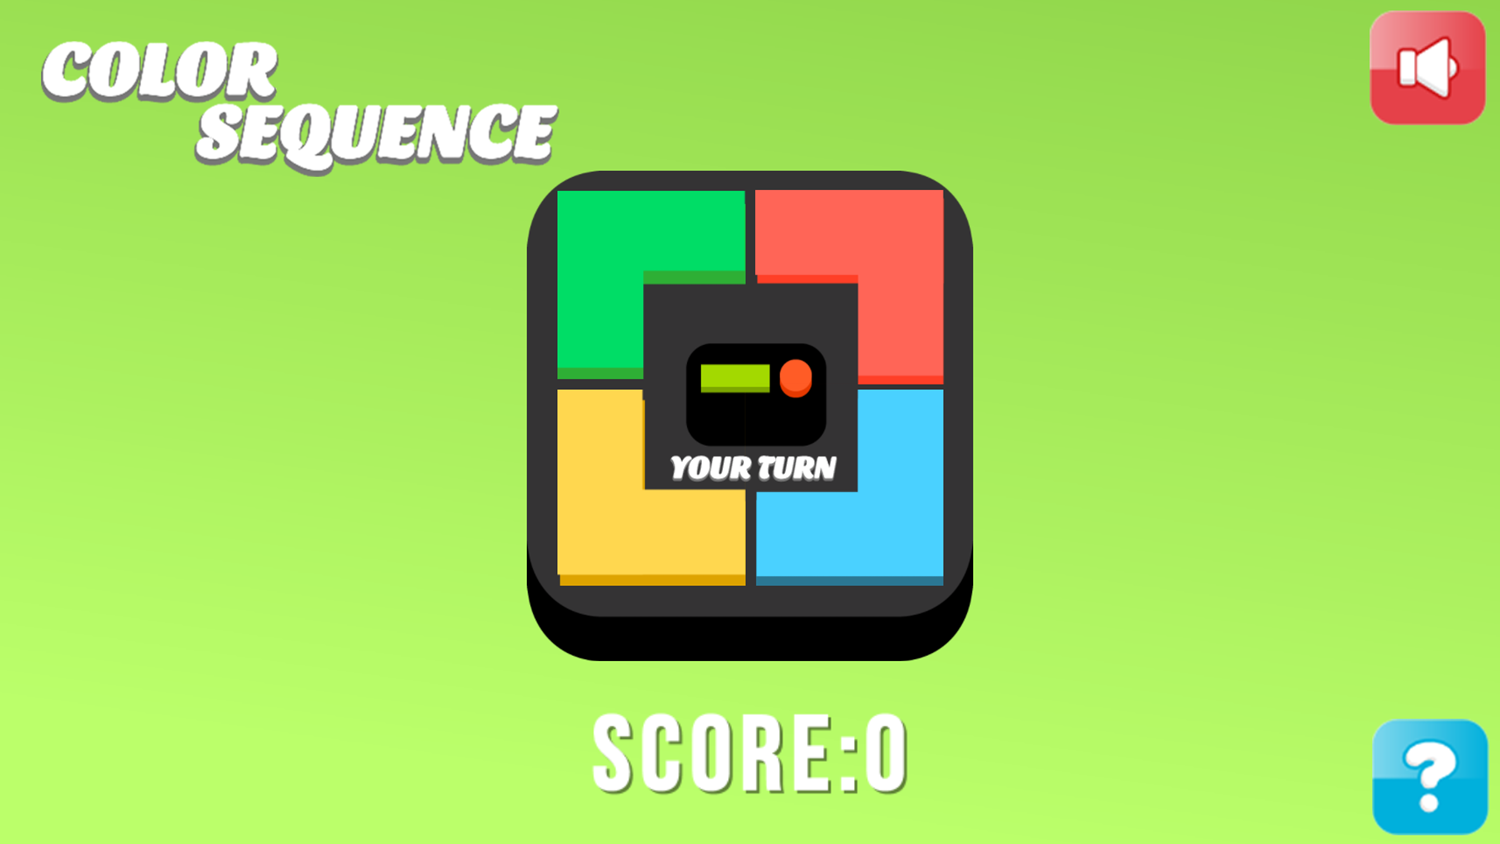 Color Sequence Game Start Screenshot.